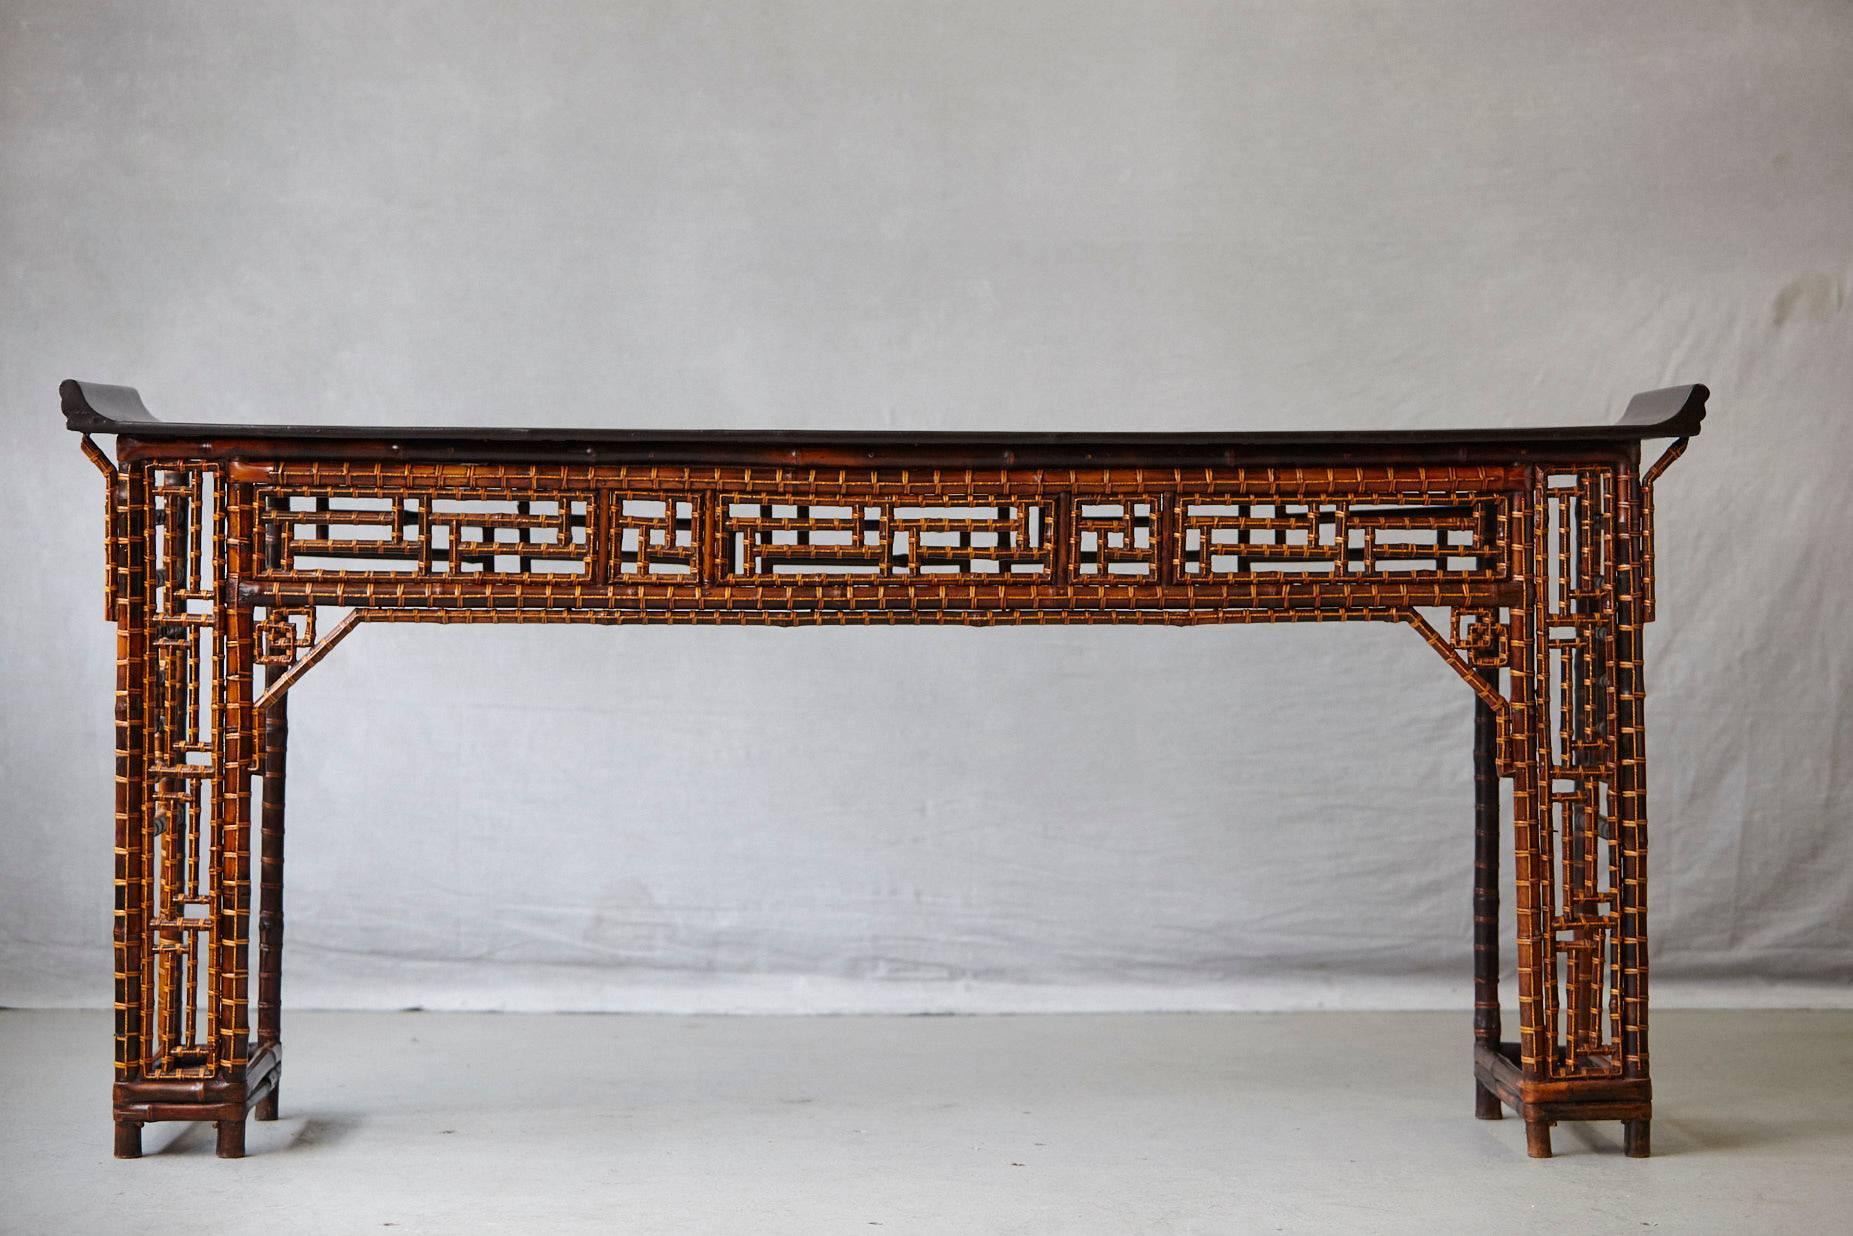 Chinese bamboo and lacquered wood altar table with geometric fretwork design made of bamboo and a black lacquered top, circa 1910s.
Measurements: H 33, at the bended corners height is 35 x W 73 x D 15.5
Purchased from a well-known Asian antique